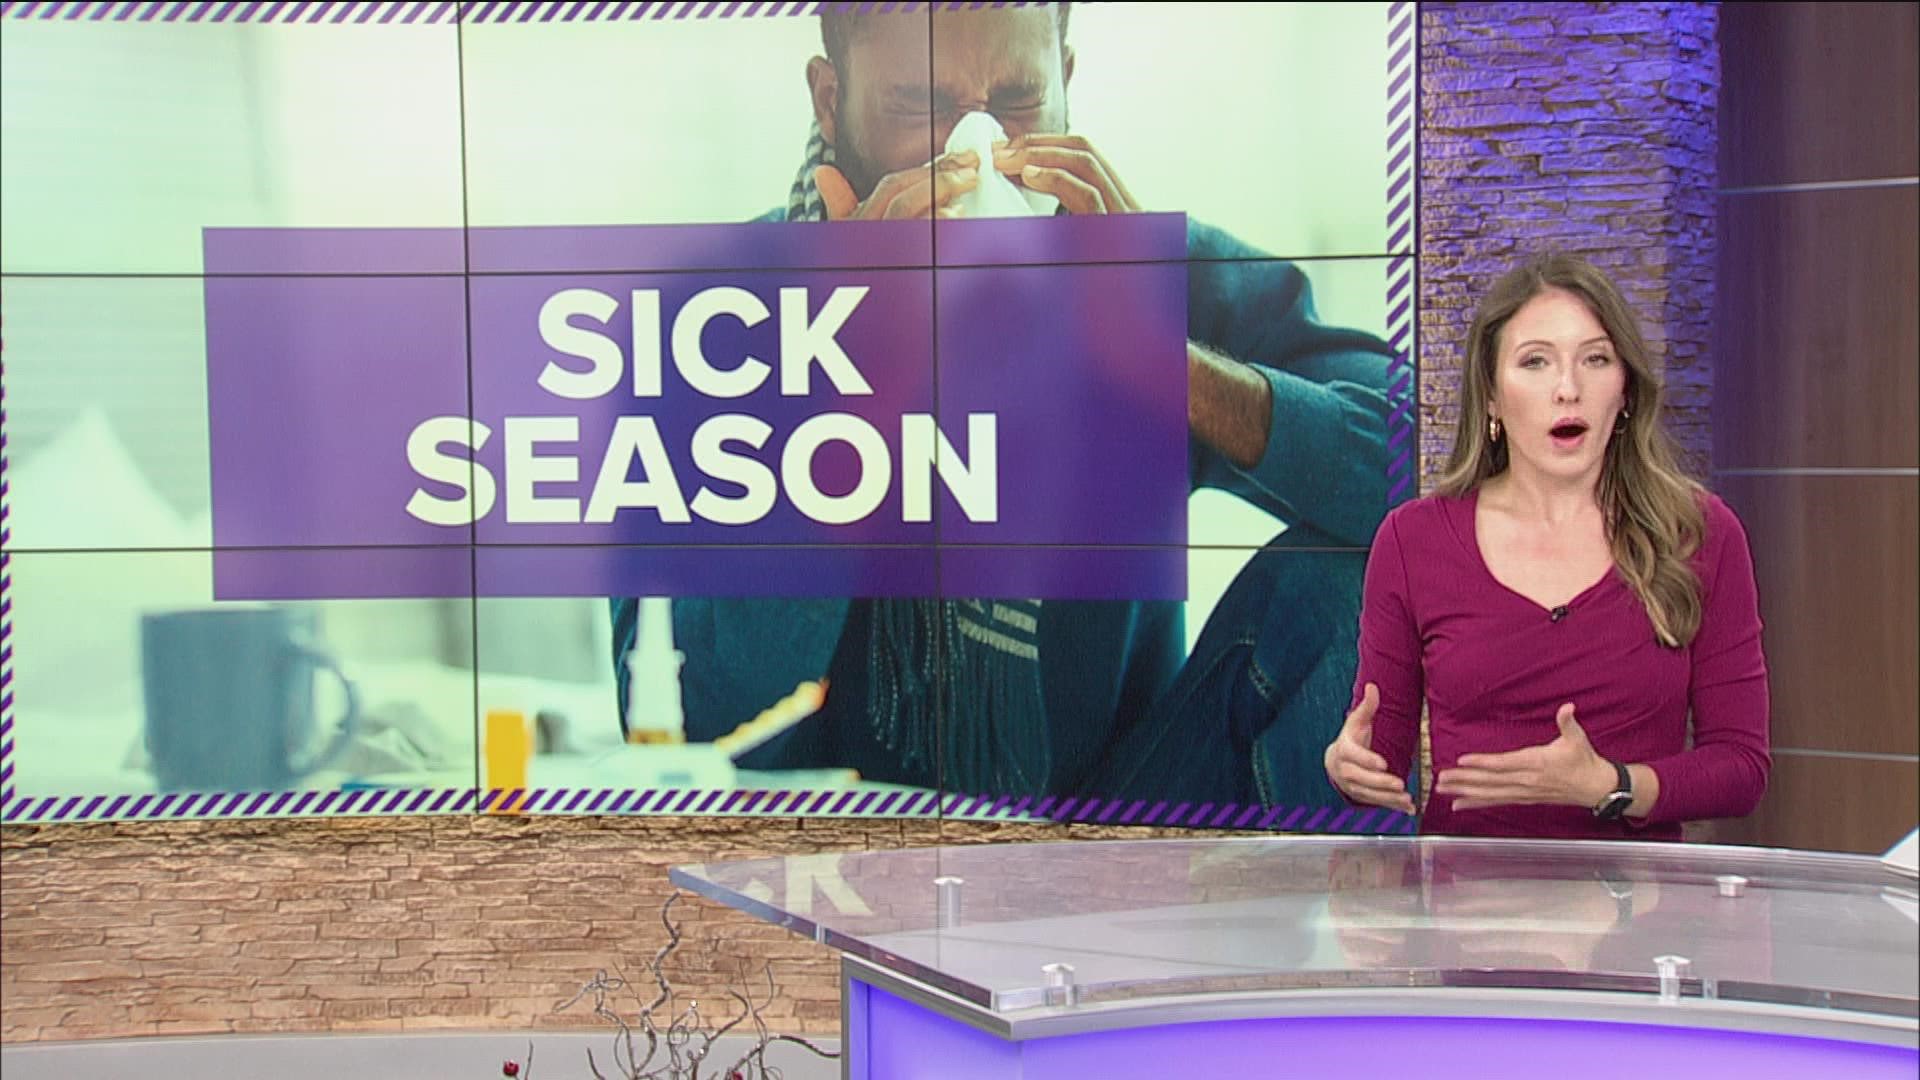 Demand is high for medicine to treat flu, colds and other seasonal illnesses on the rise this time of year.